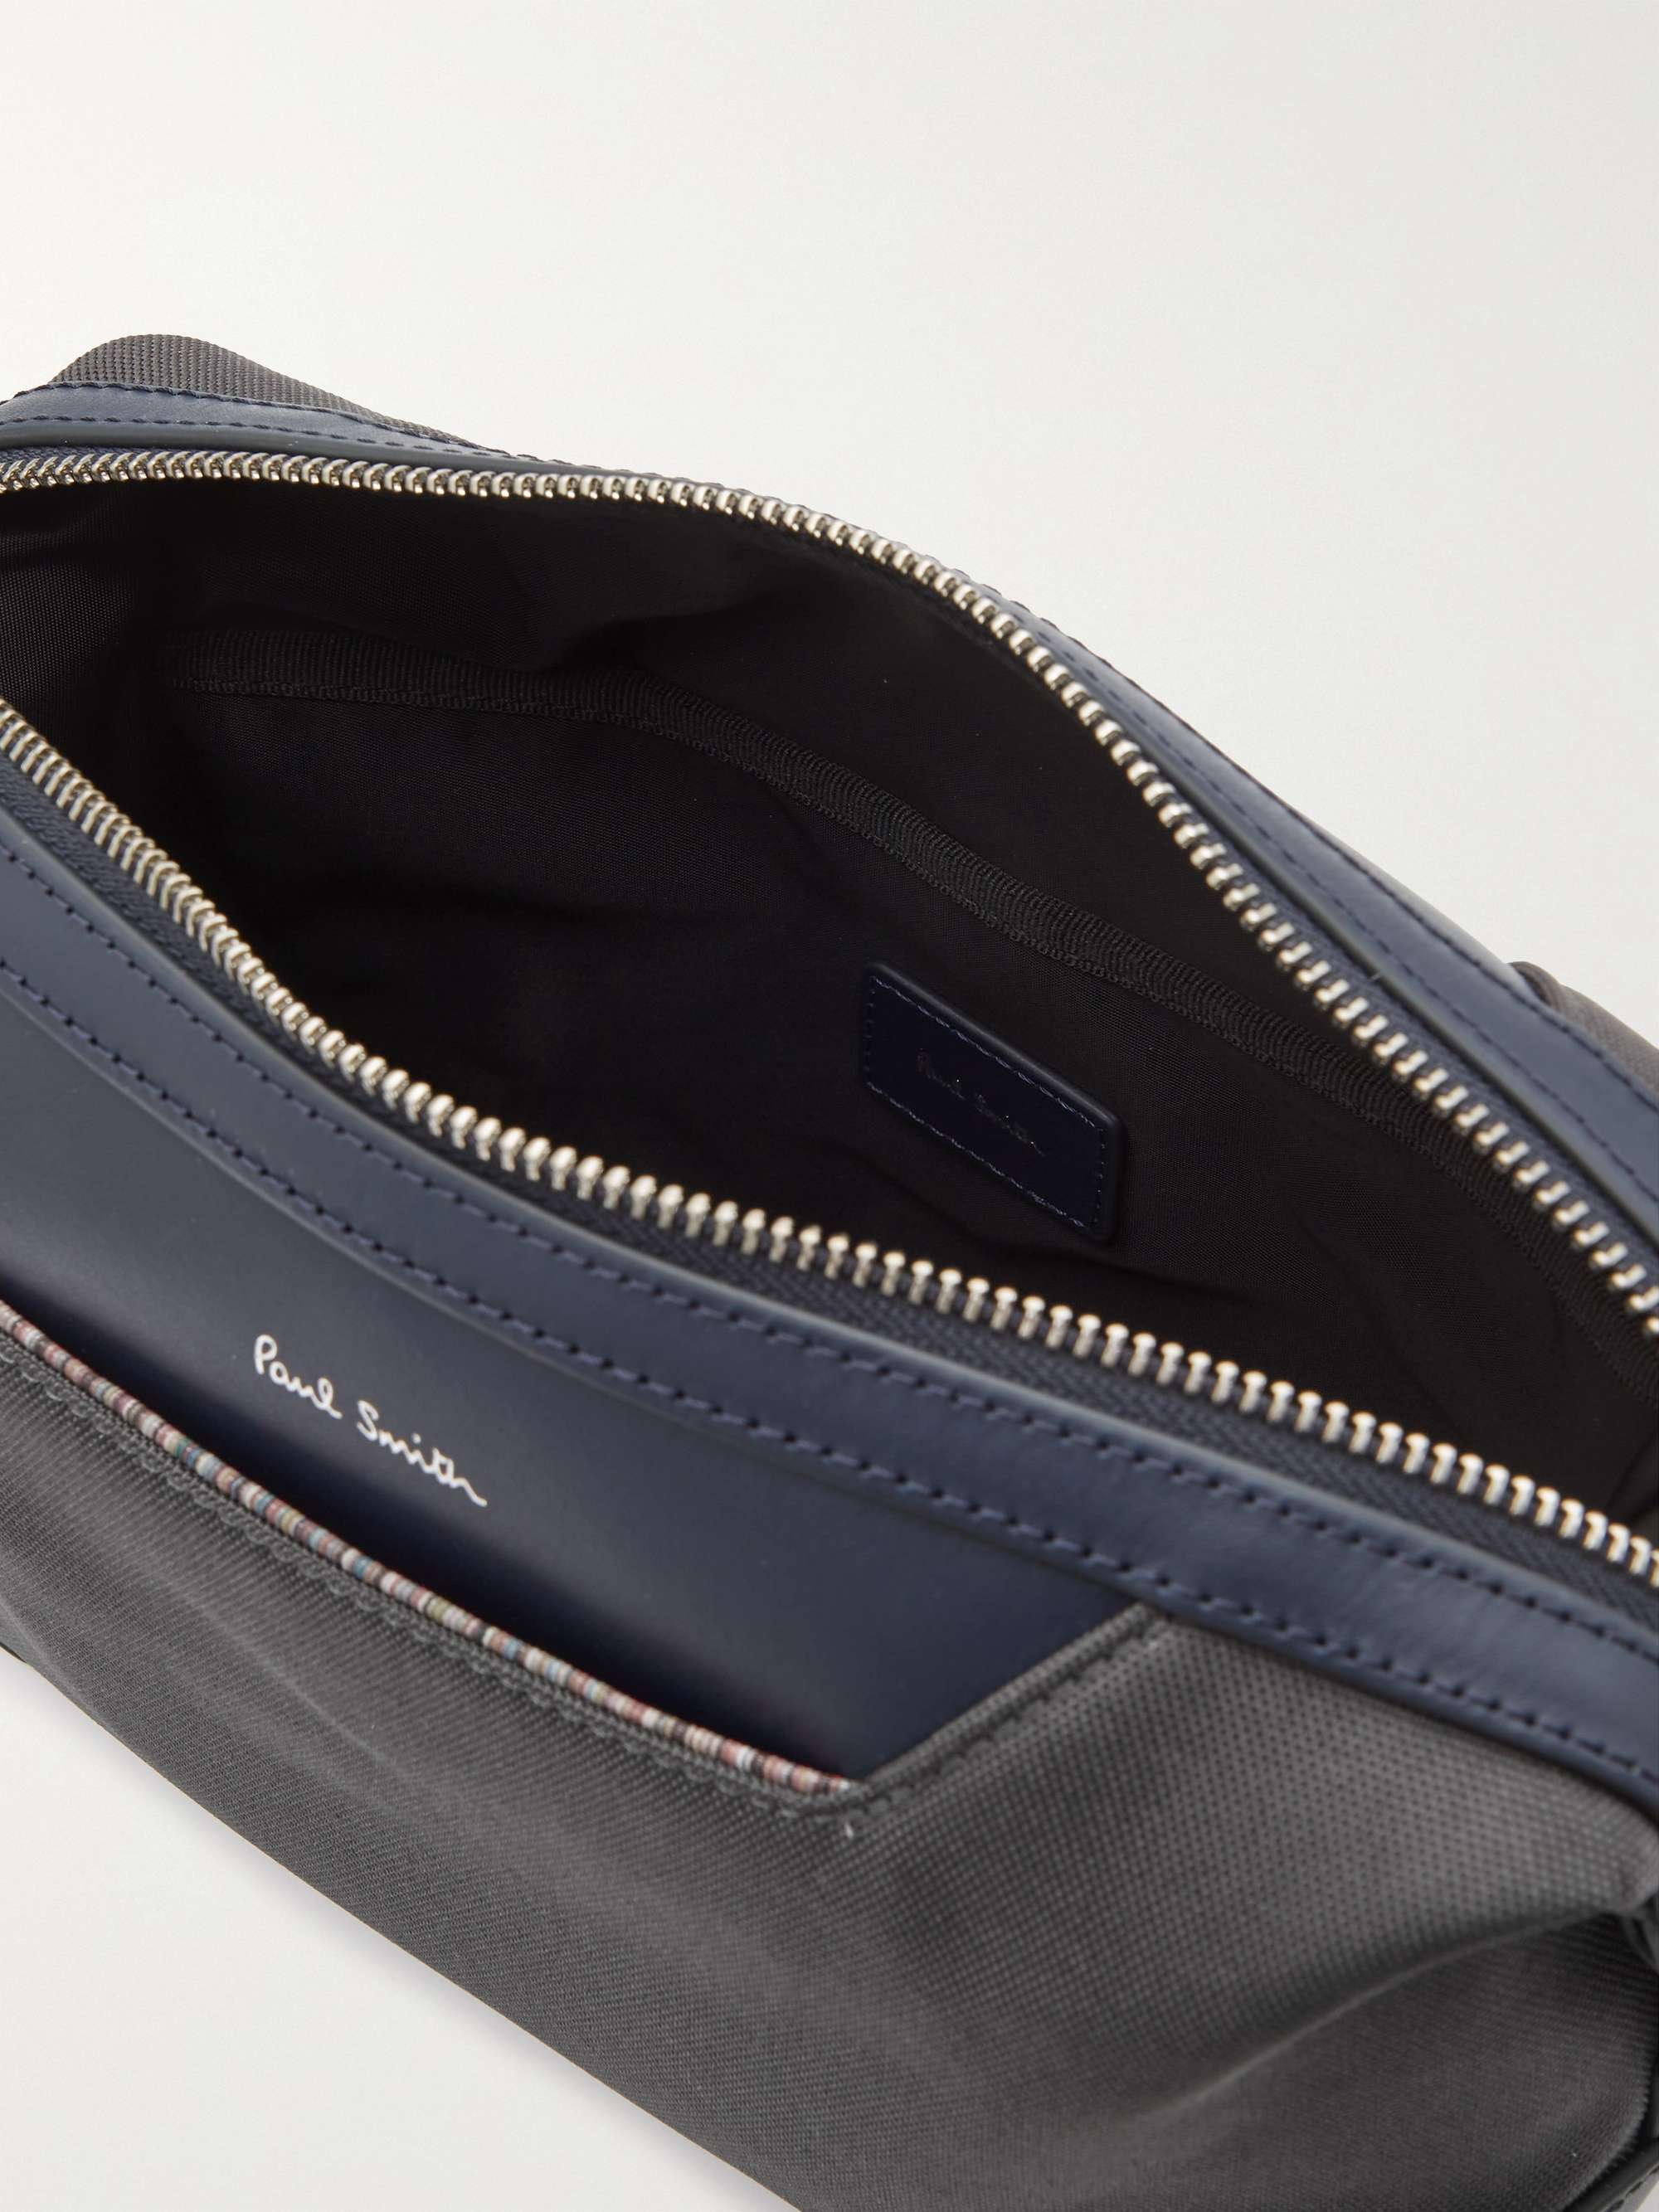 PAUL SMITH Leather-Trimmed Recycled Canvas Wash Bag